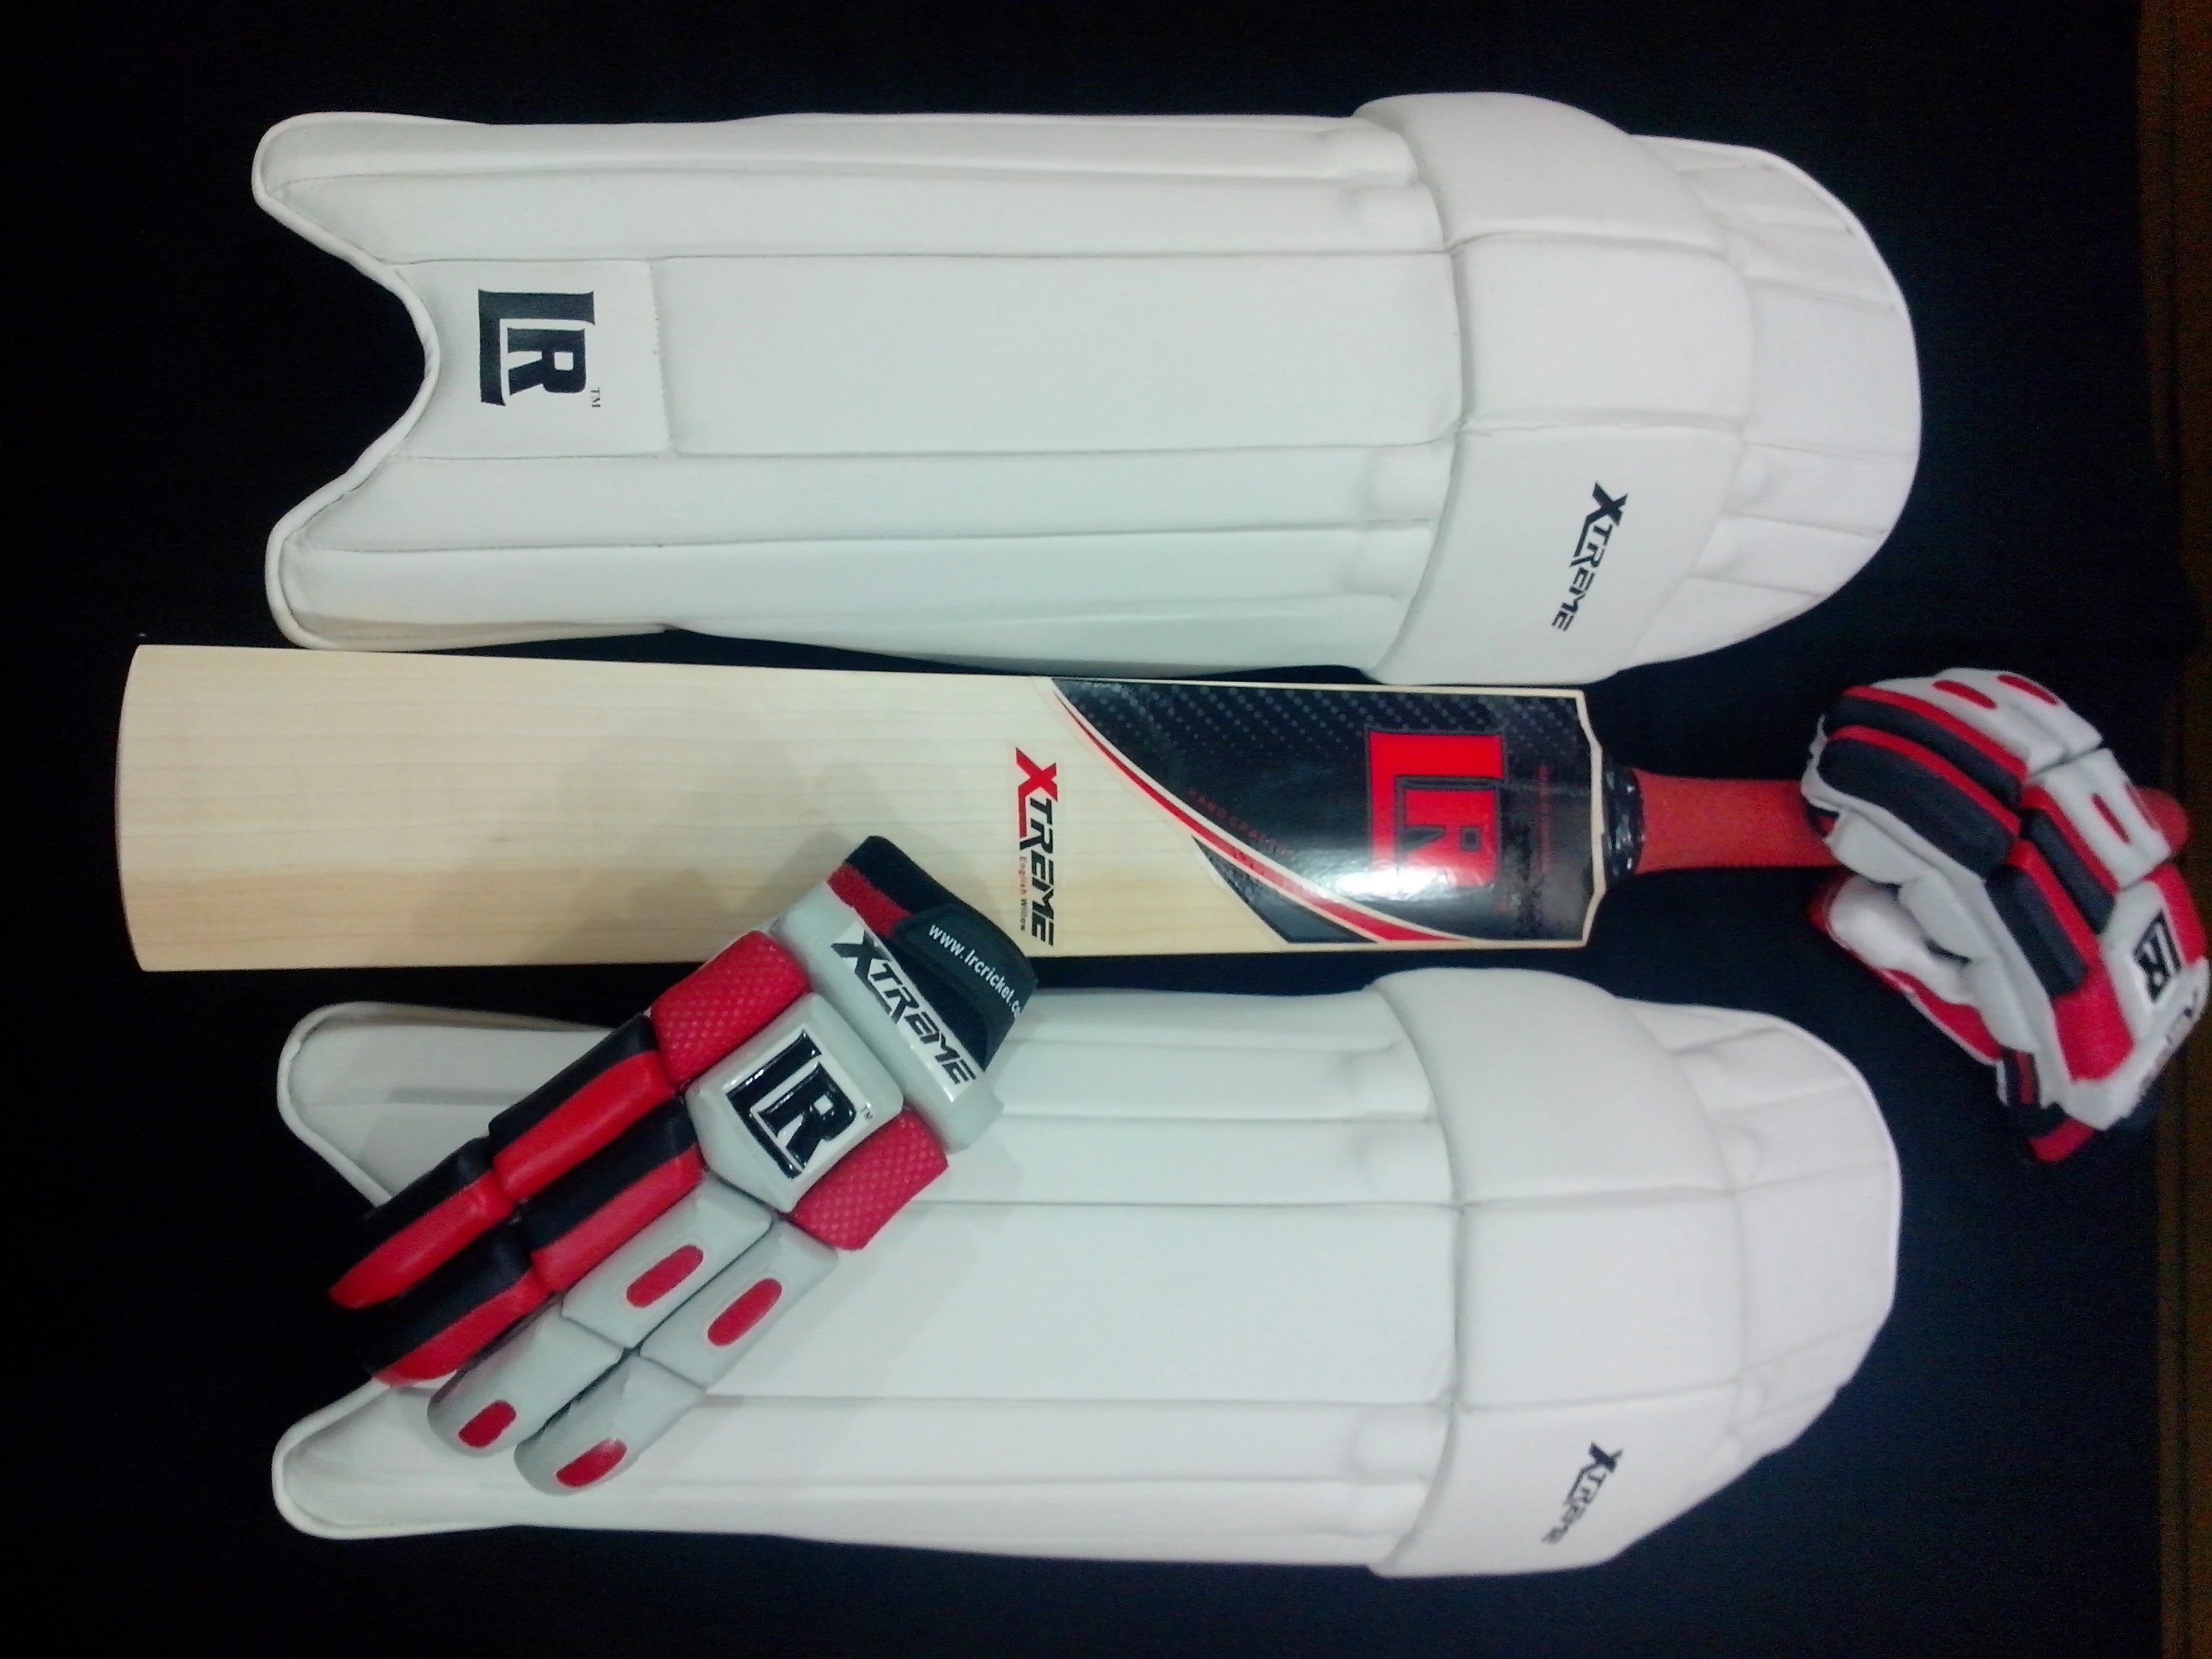 Most Popular and Recent Used  Leg Guards Cricket Batting Pads and Xtreme Batting Gloves with your colors combinations